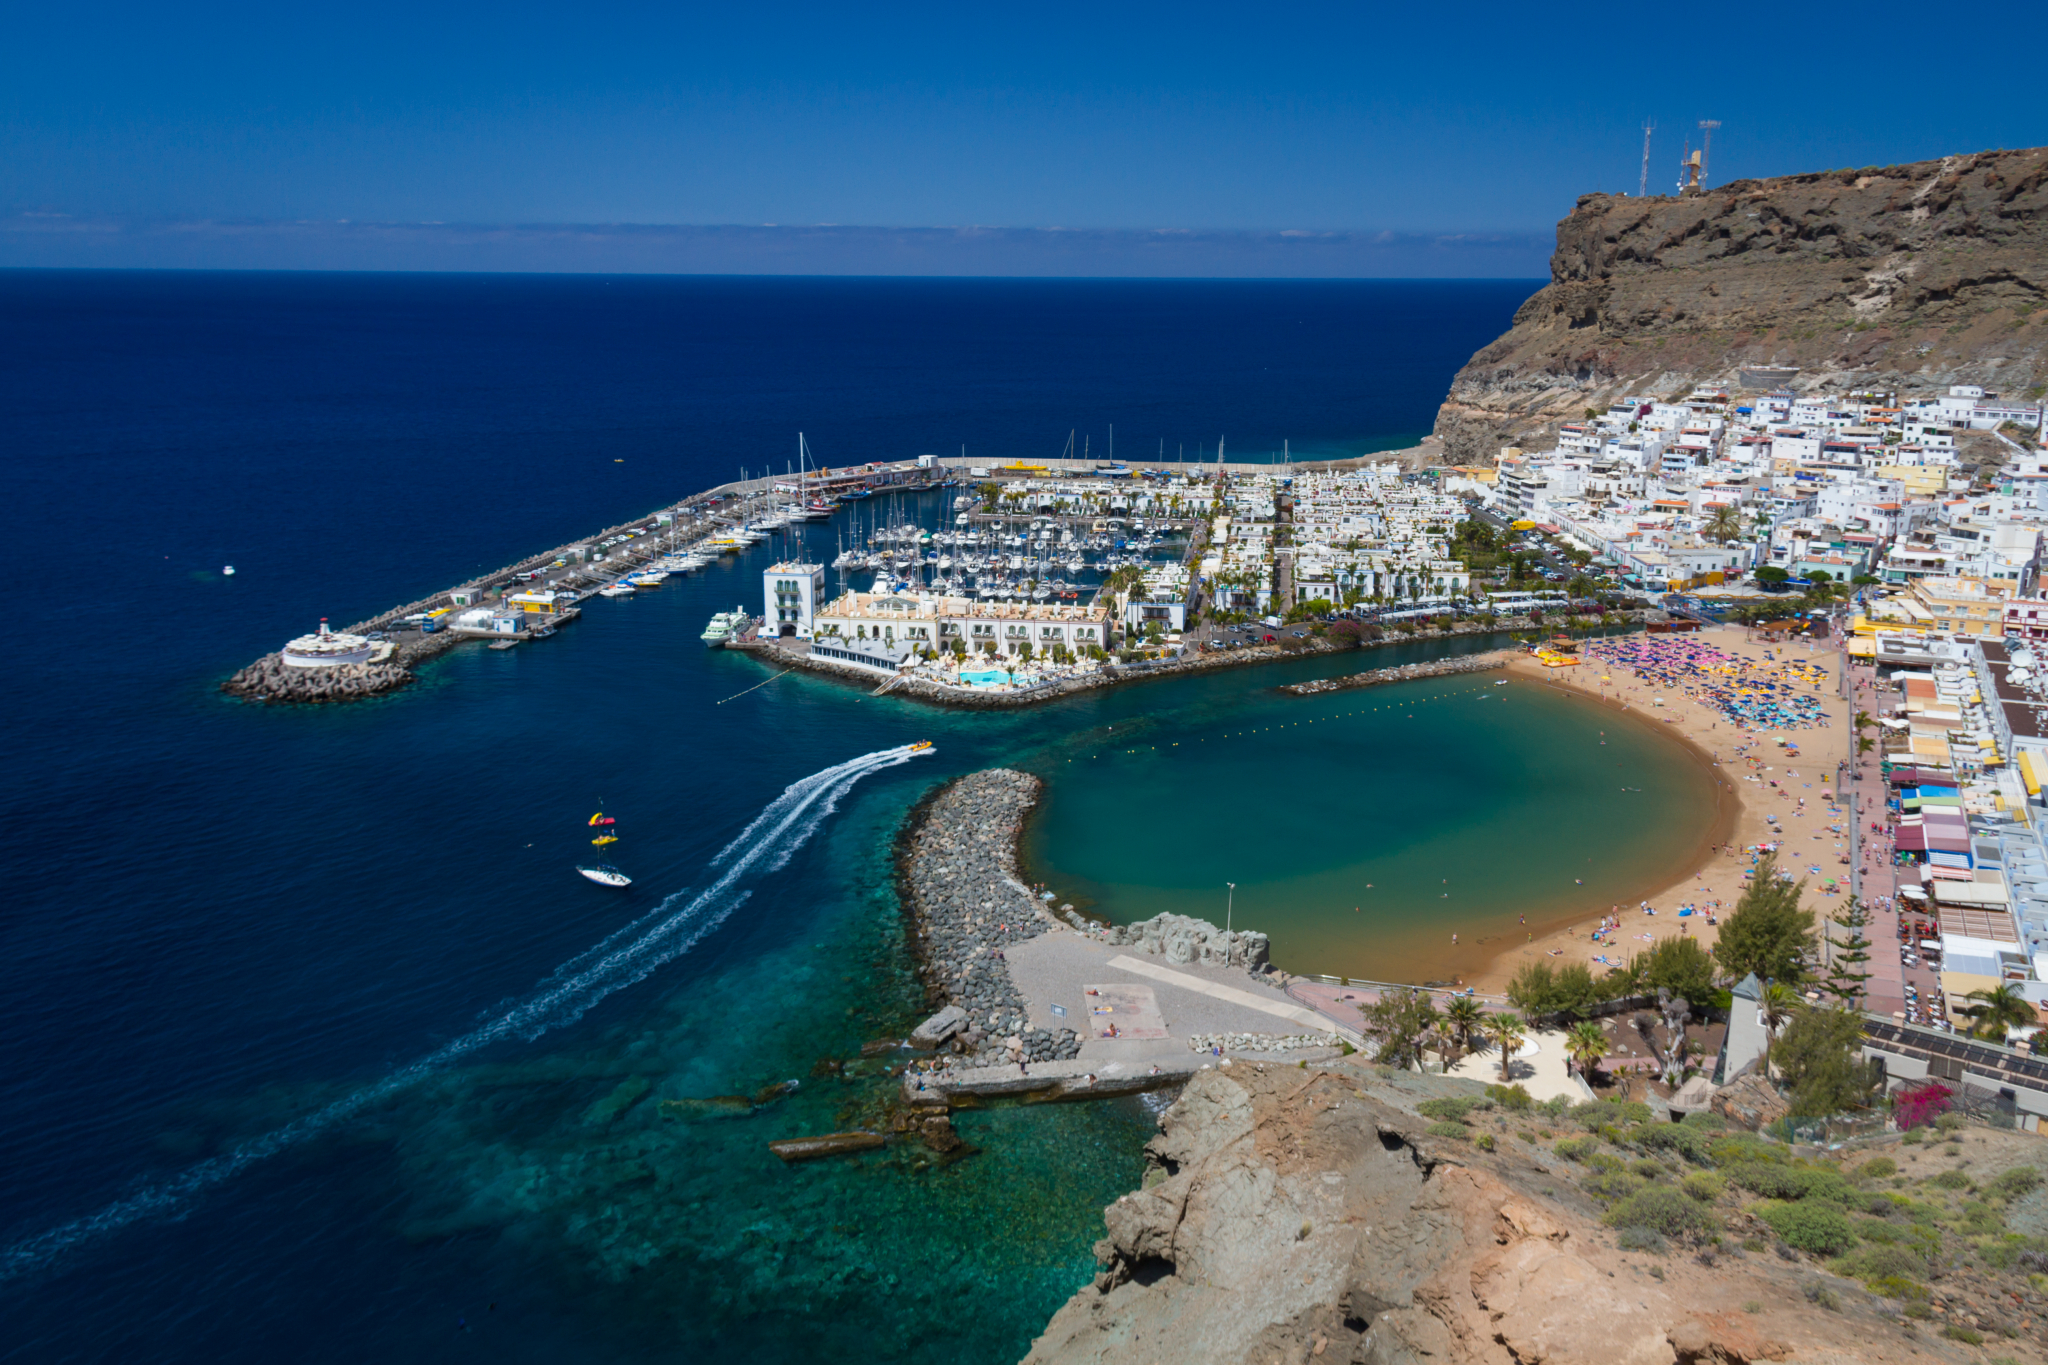 Guide to the sports ,marinas and harbours of Gran Canaria||||Pasito Blanco marina in south Gran Canaria|Puerto de Mogán marina in south Gran Canaria|Puerto Rico marina in south Gran Canaria